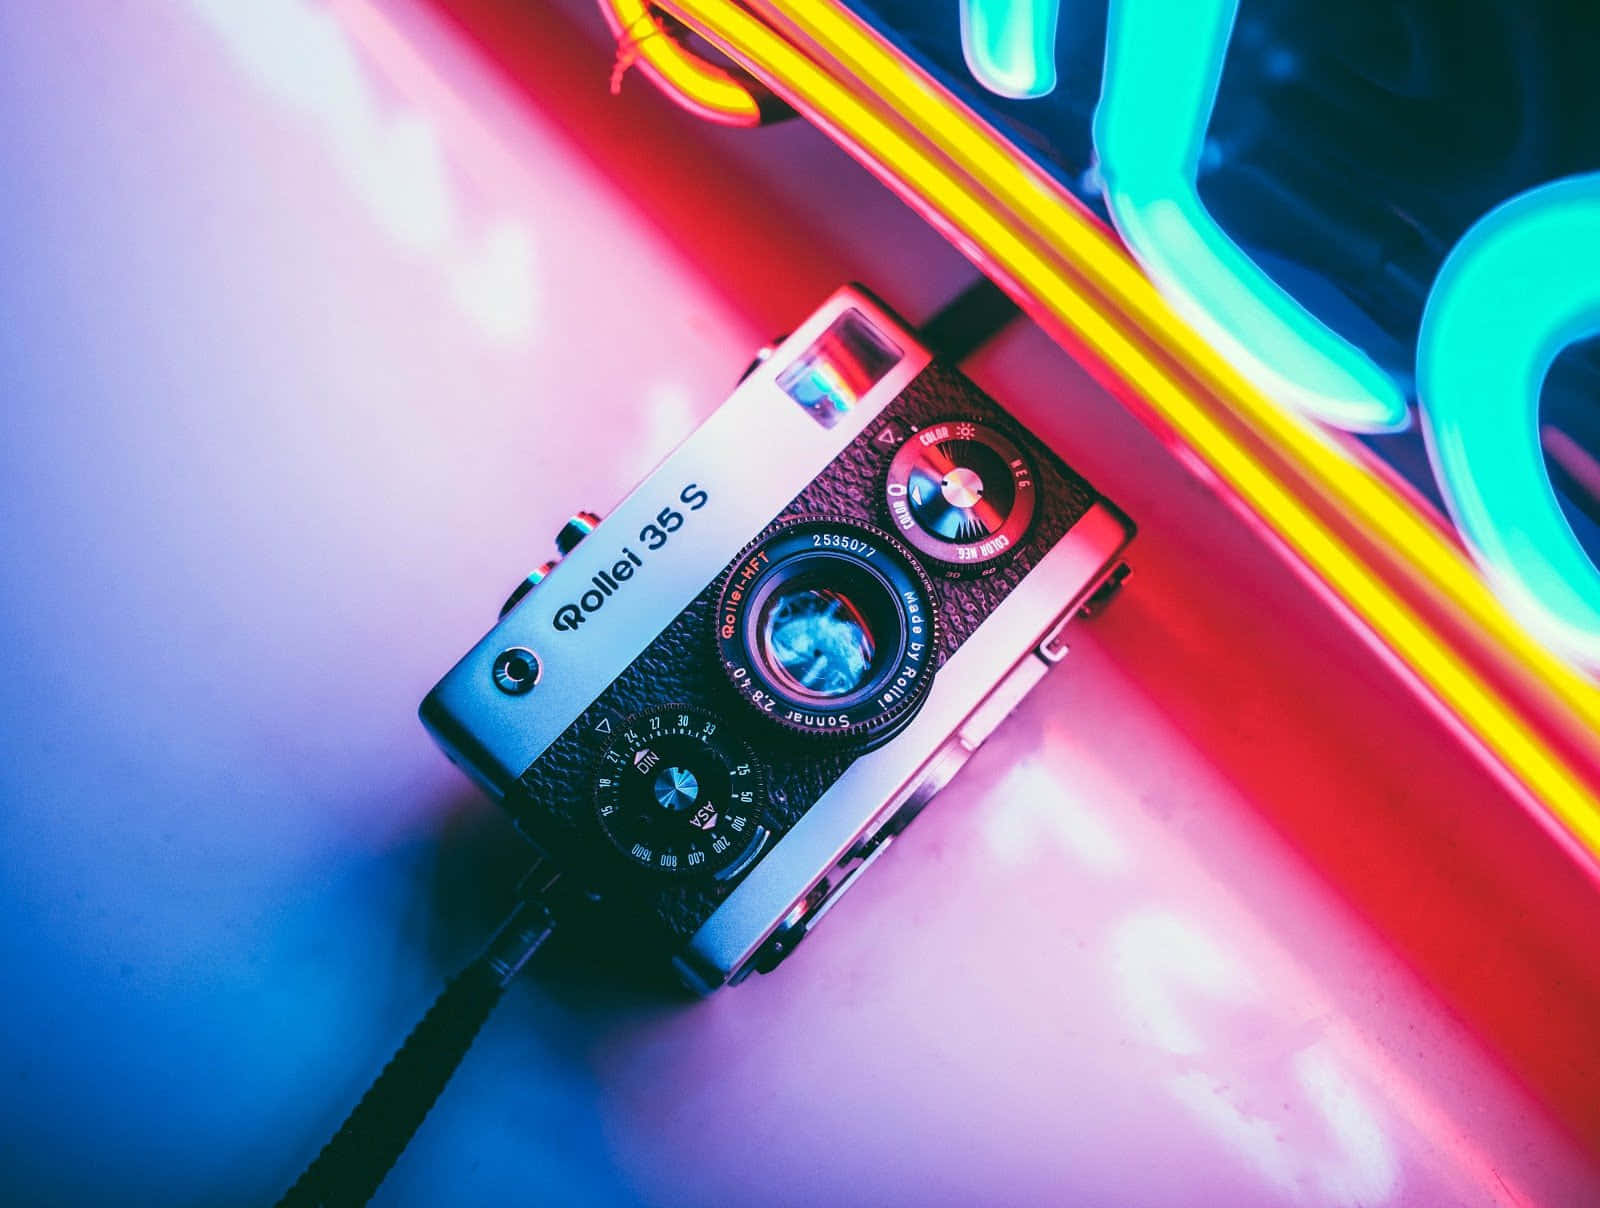 Rollei Photography Camera On Neon Light Background